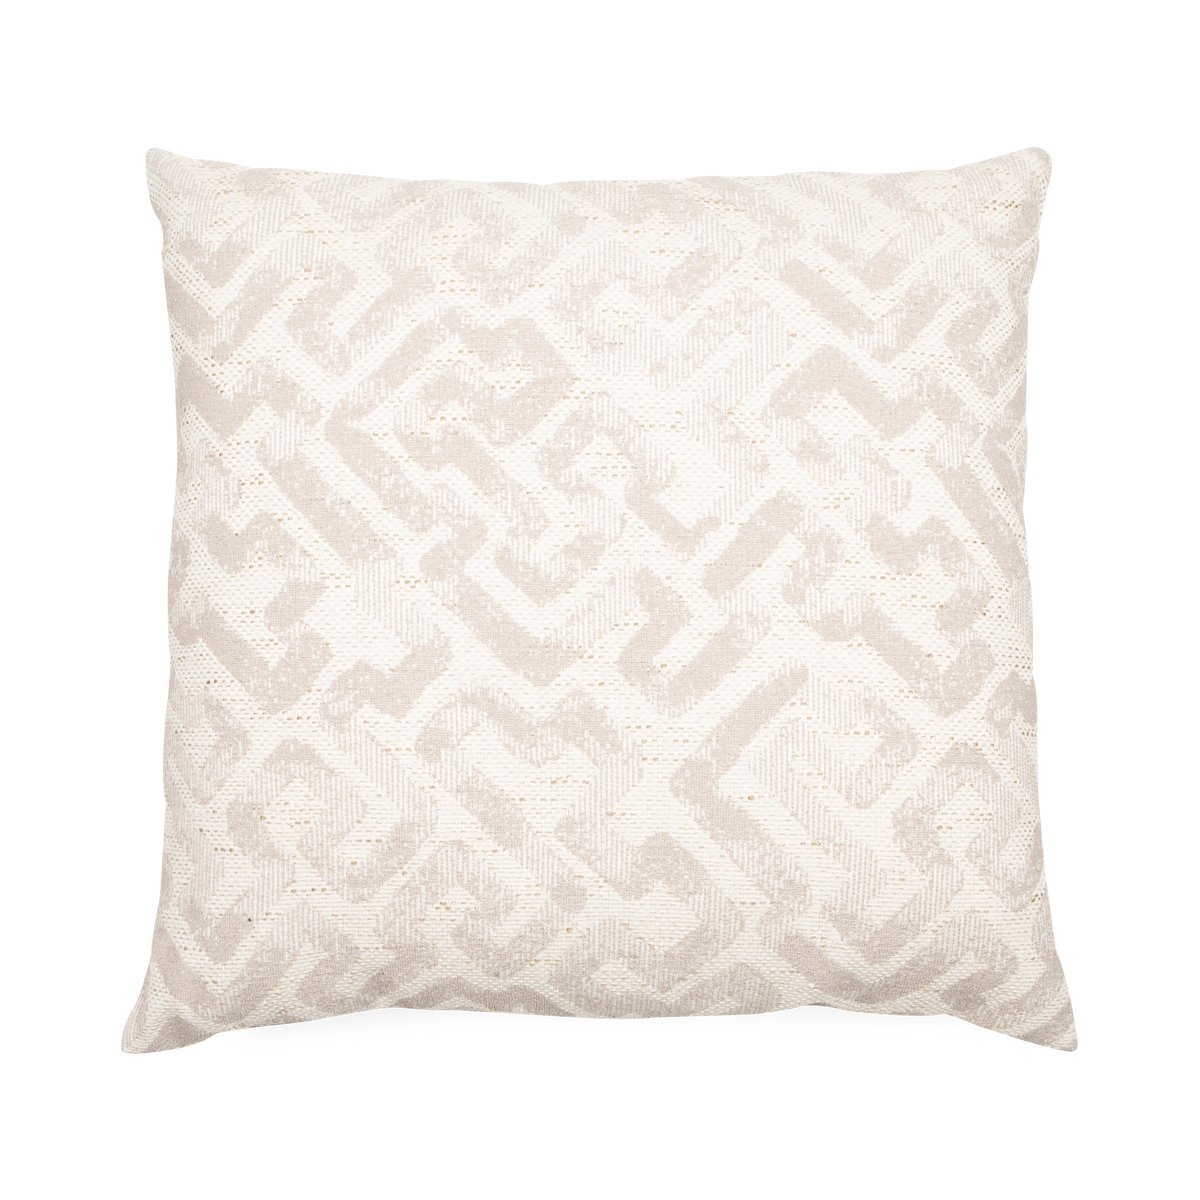 Defined by its faded maze design, the Elody Pillow adds an eye-catching design that provides a creative and unique approach to your bedding and seating décor.